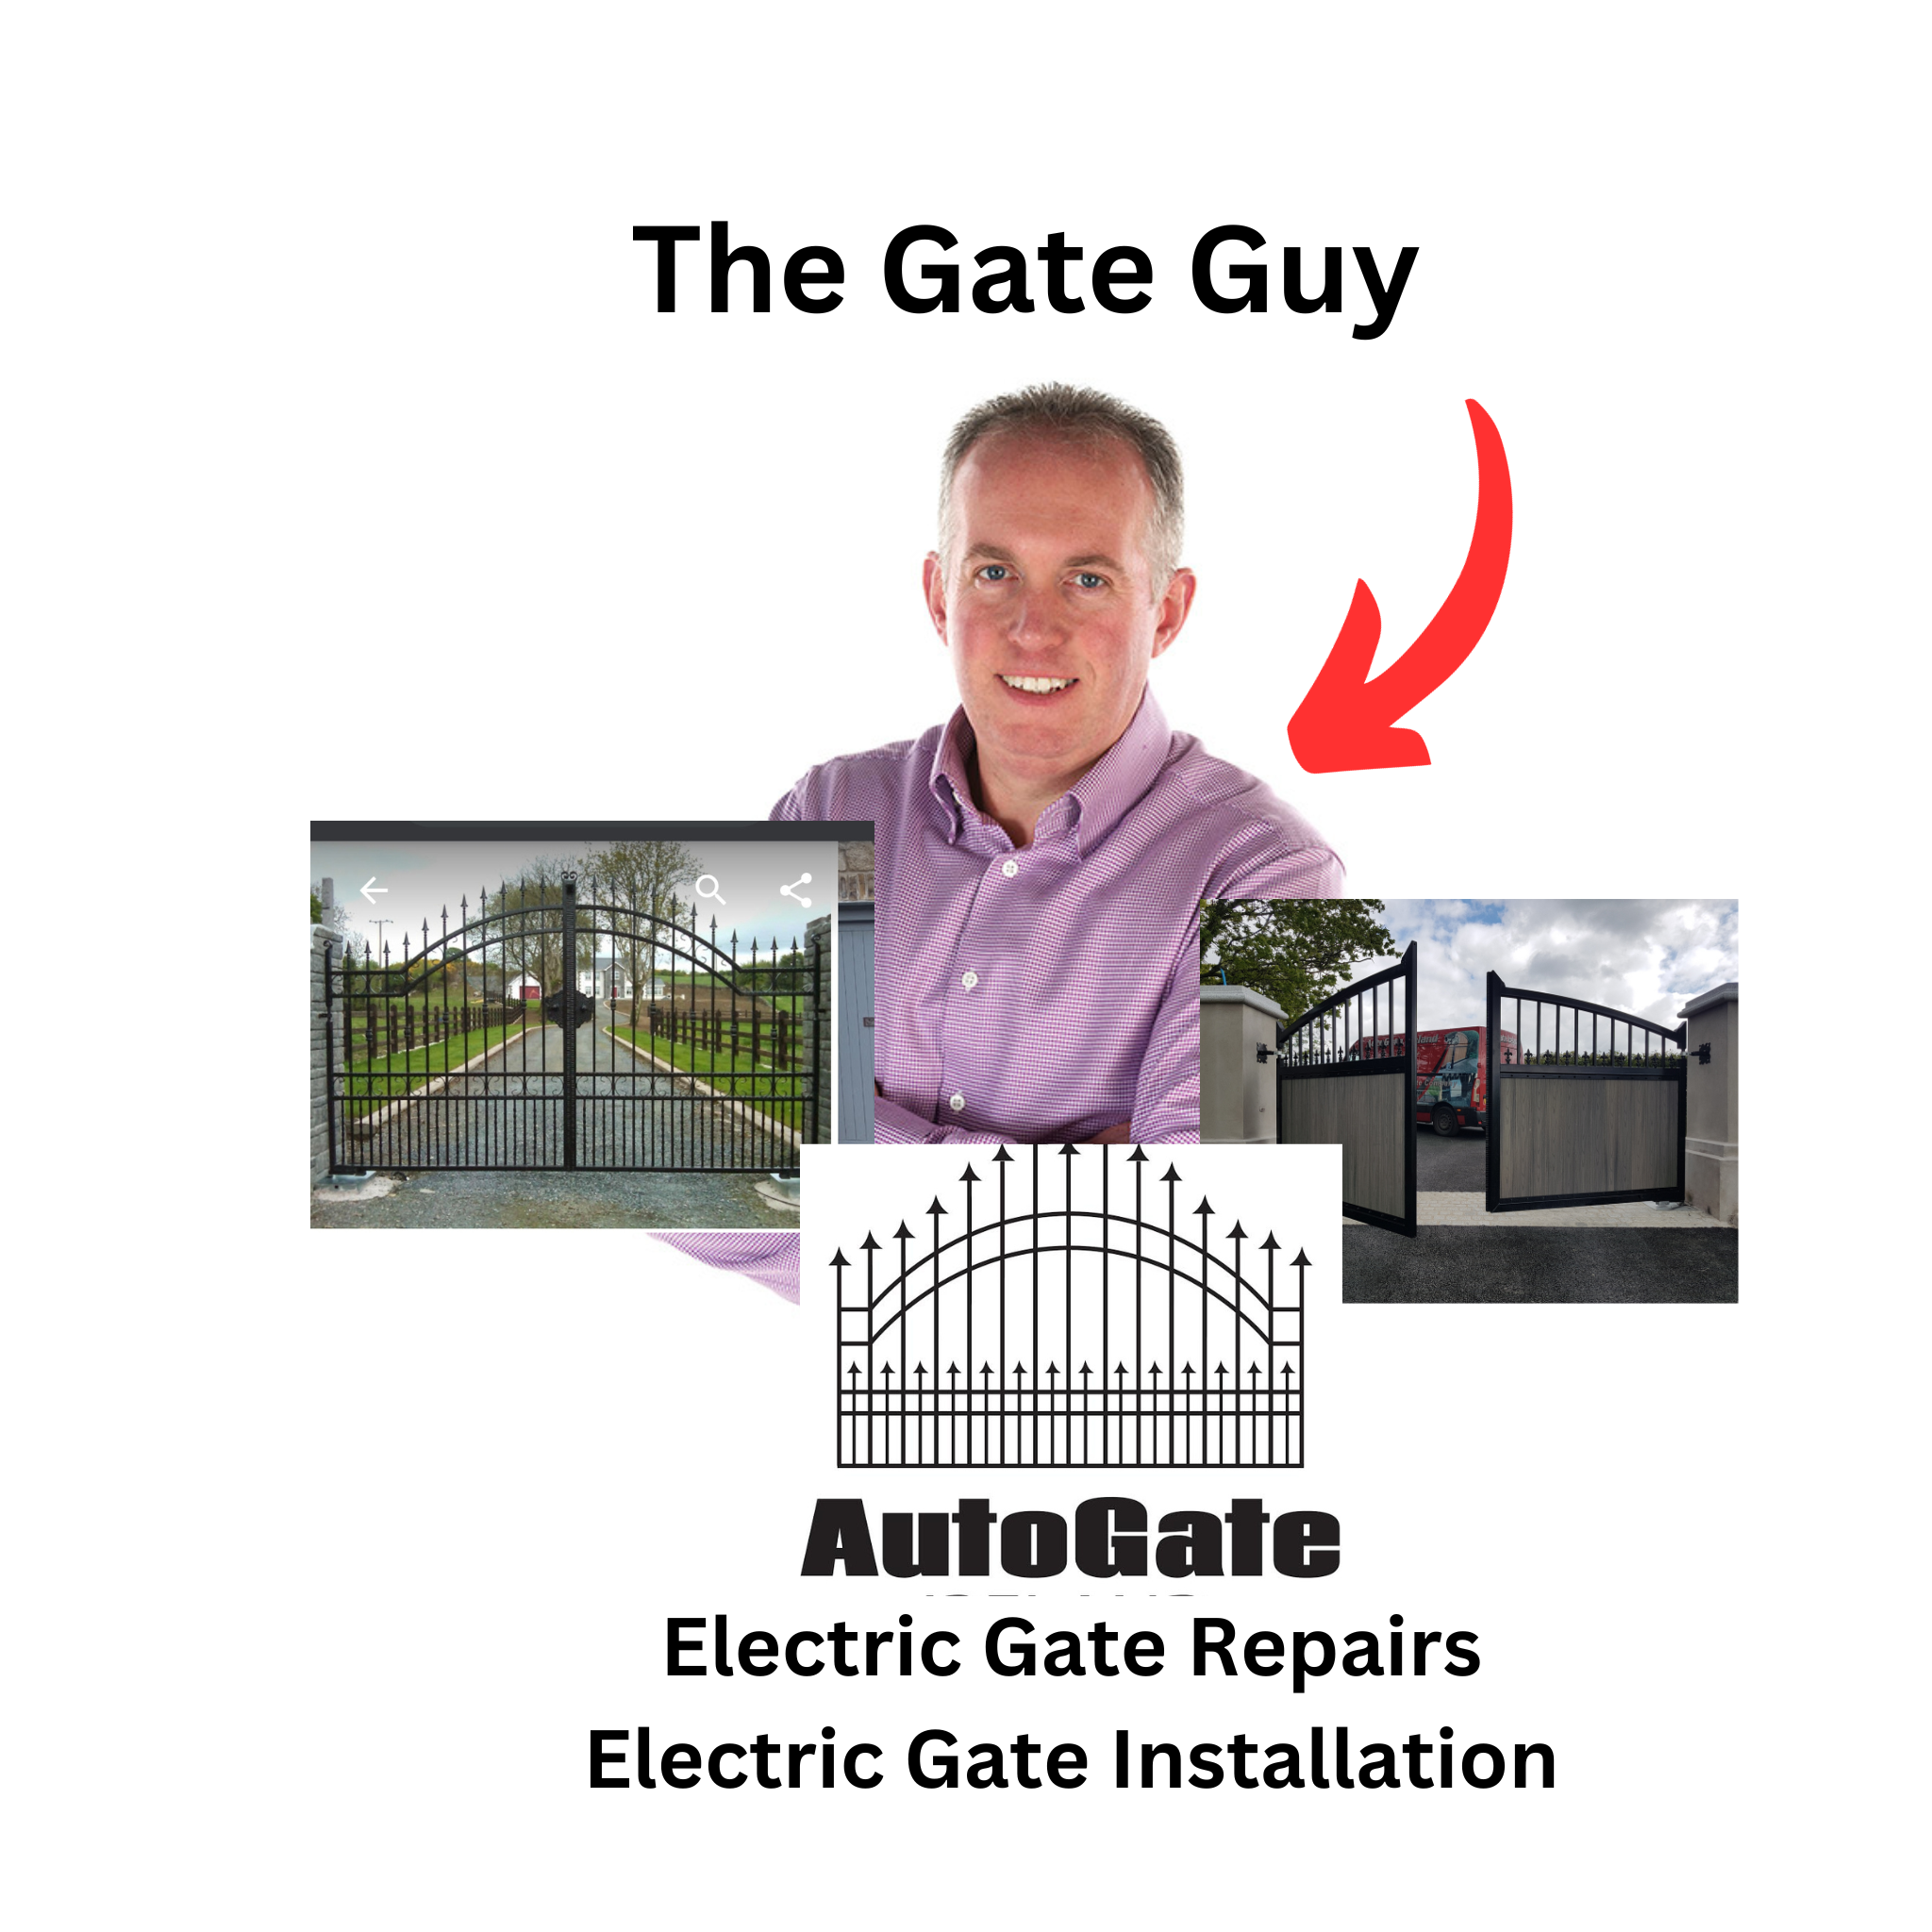 AutoGate Northern Ireland Expands their Fast Response Automatic Gate Repair Services in Belfast and across Northern Ireland